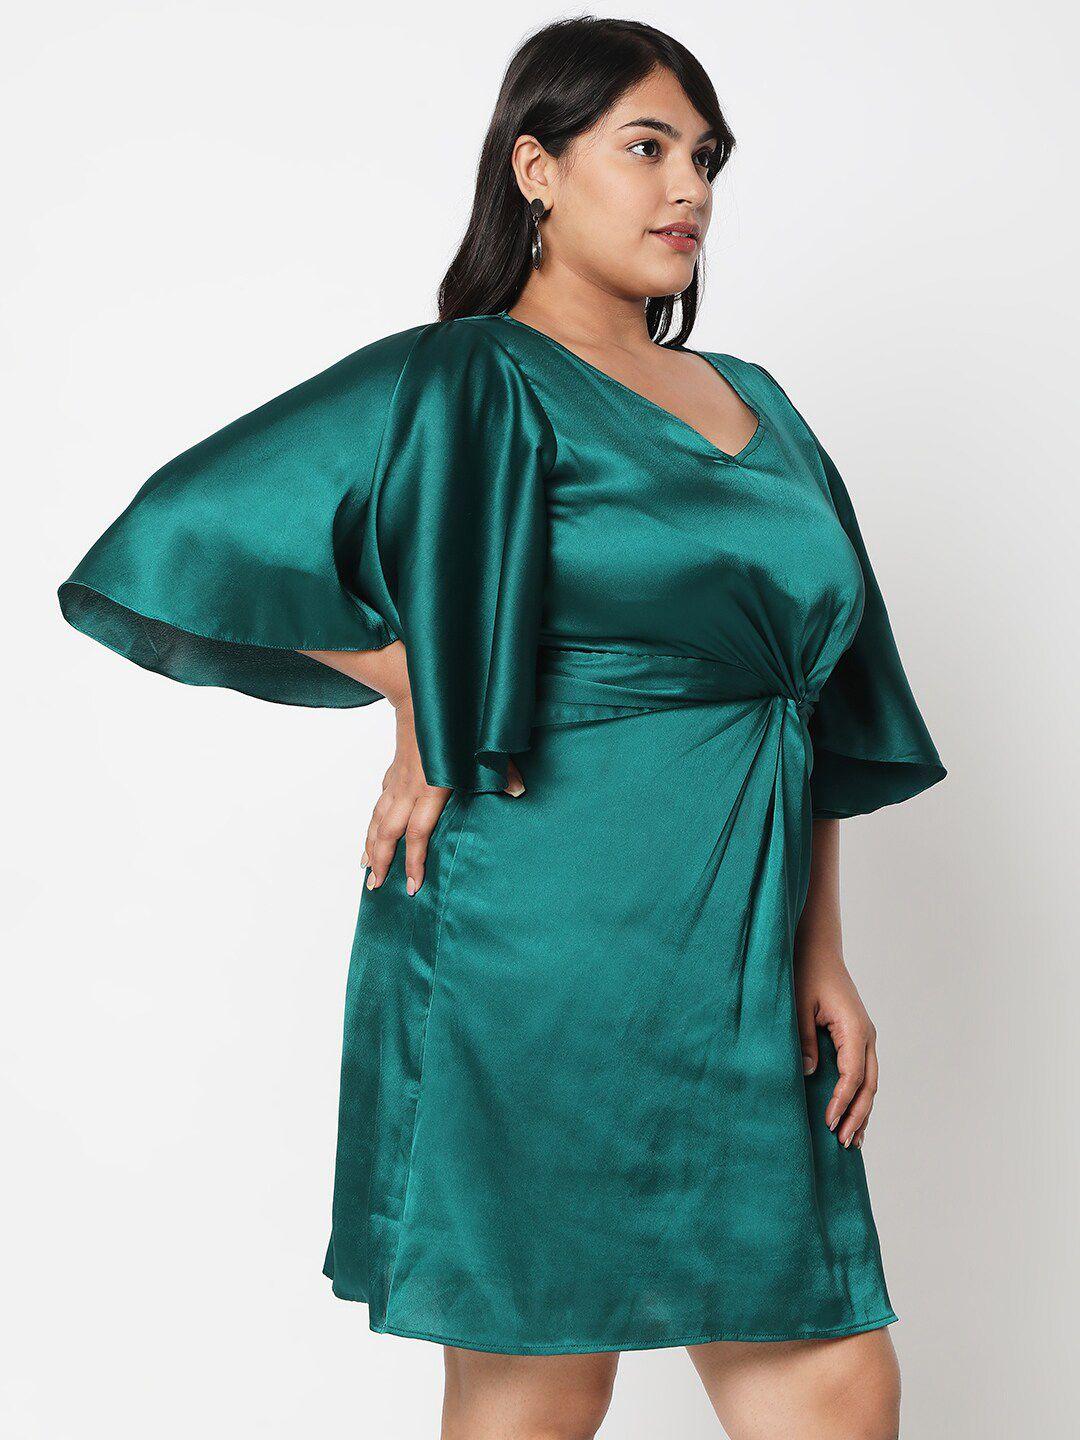 curves by mish plus size green satin fit & flare dress